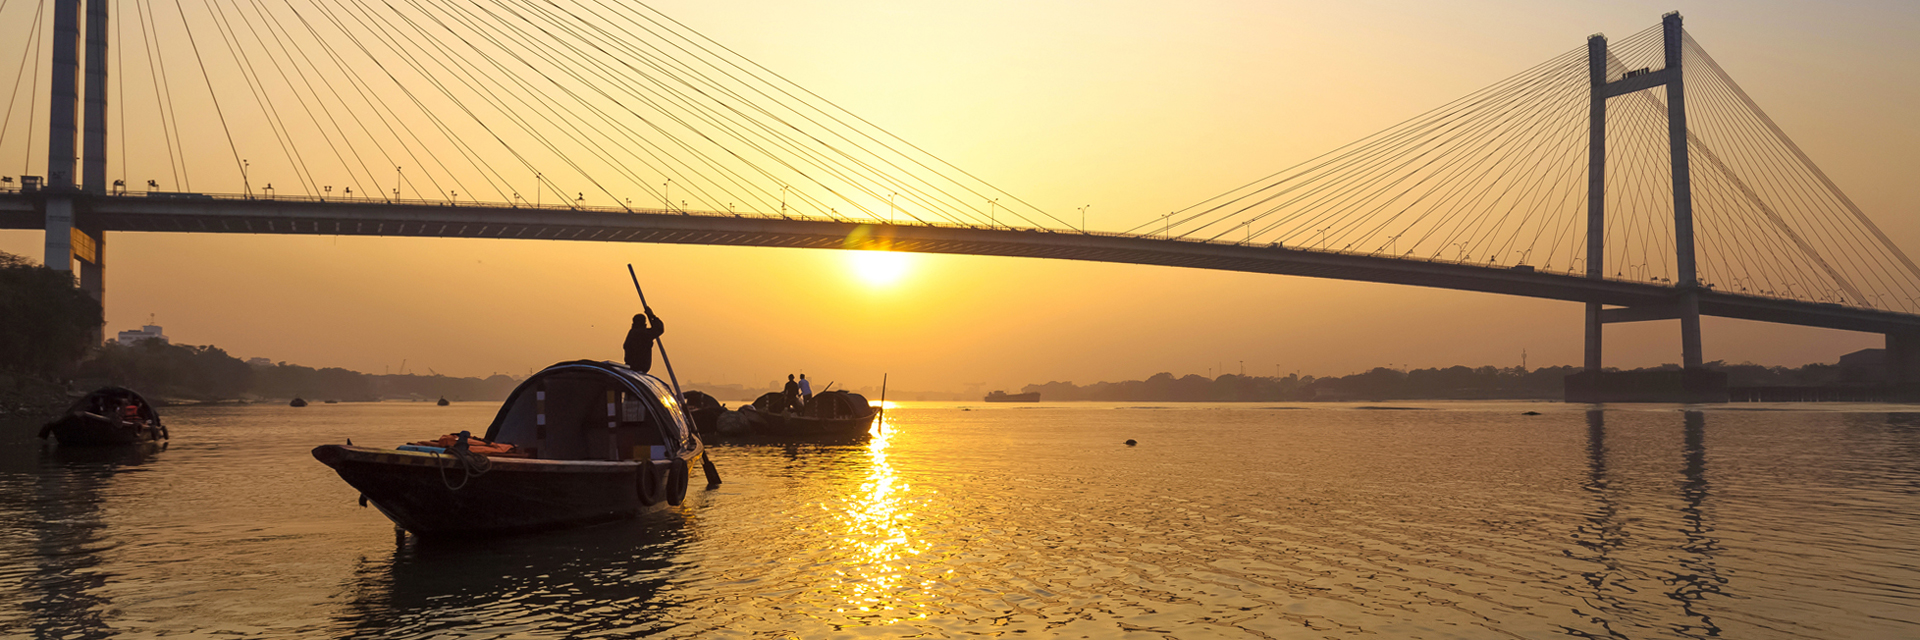 View of the Hooghly River, India from Prinsep Ghat at sunset